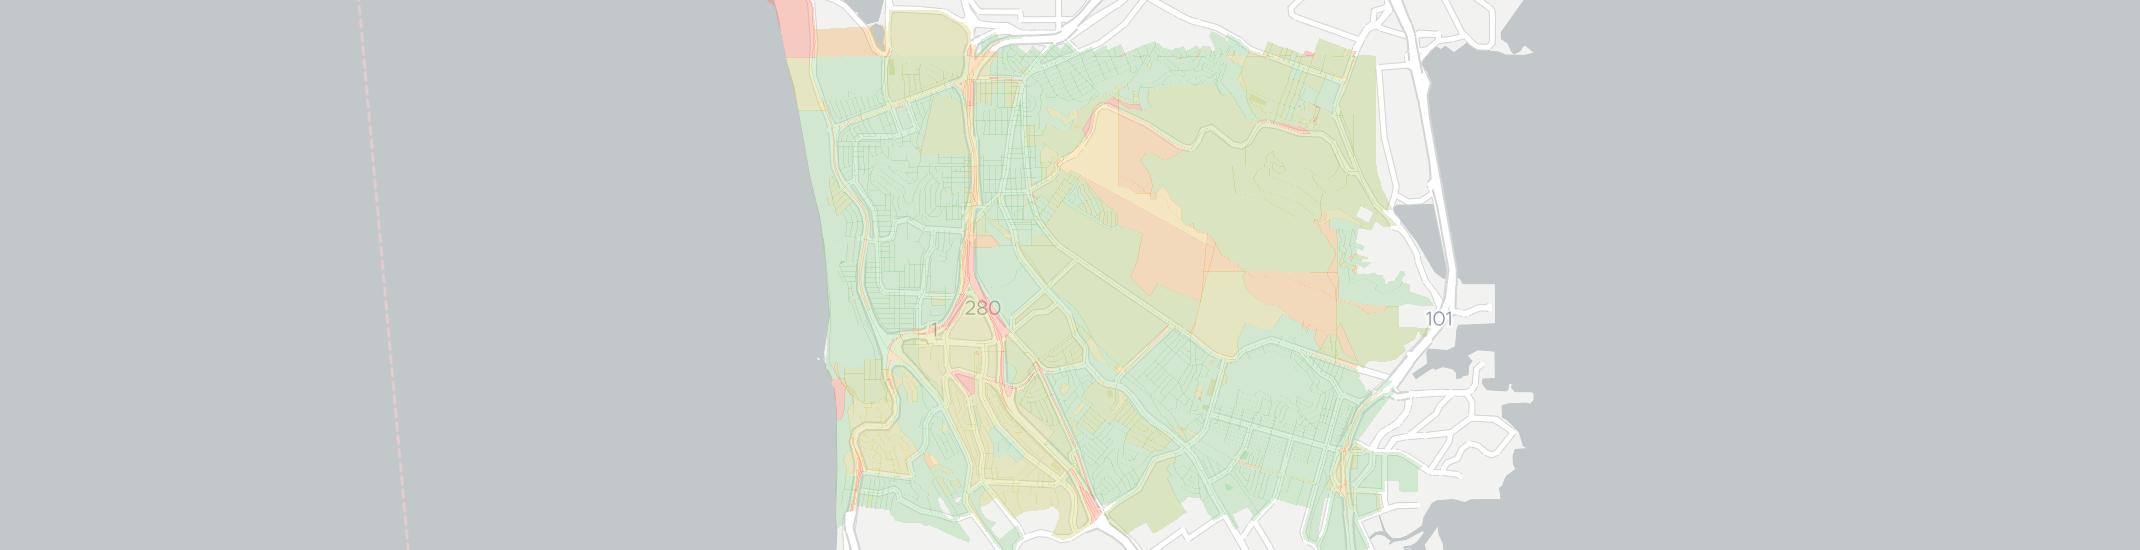 Daly City Internet Competition Map. Click for interactive map.